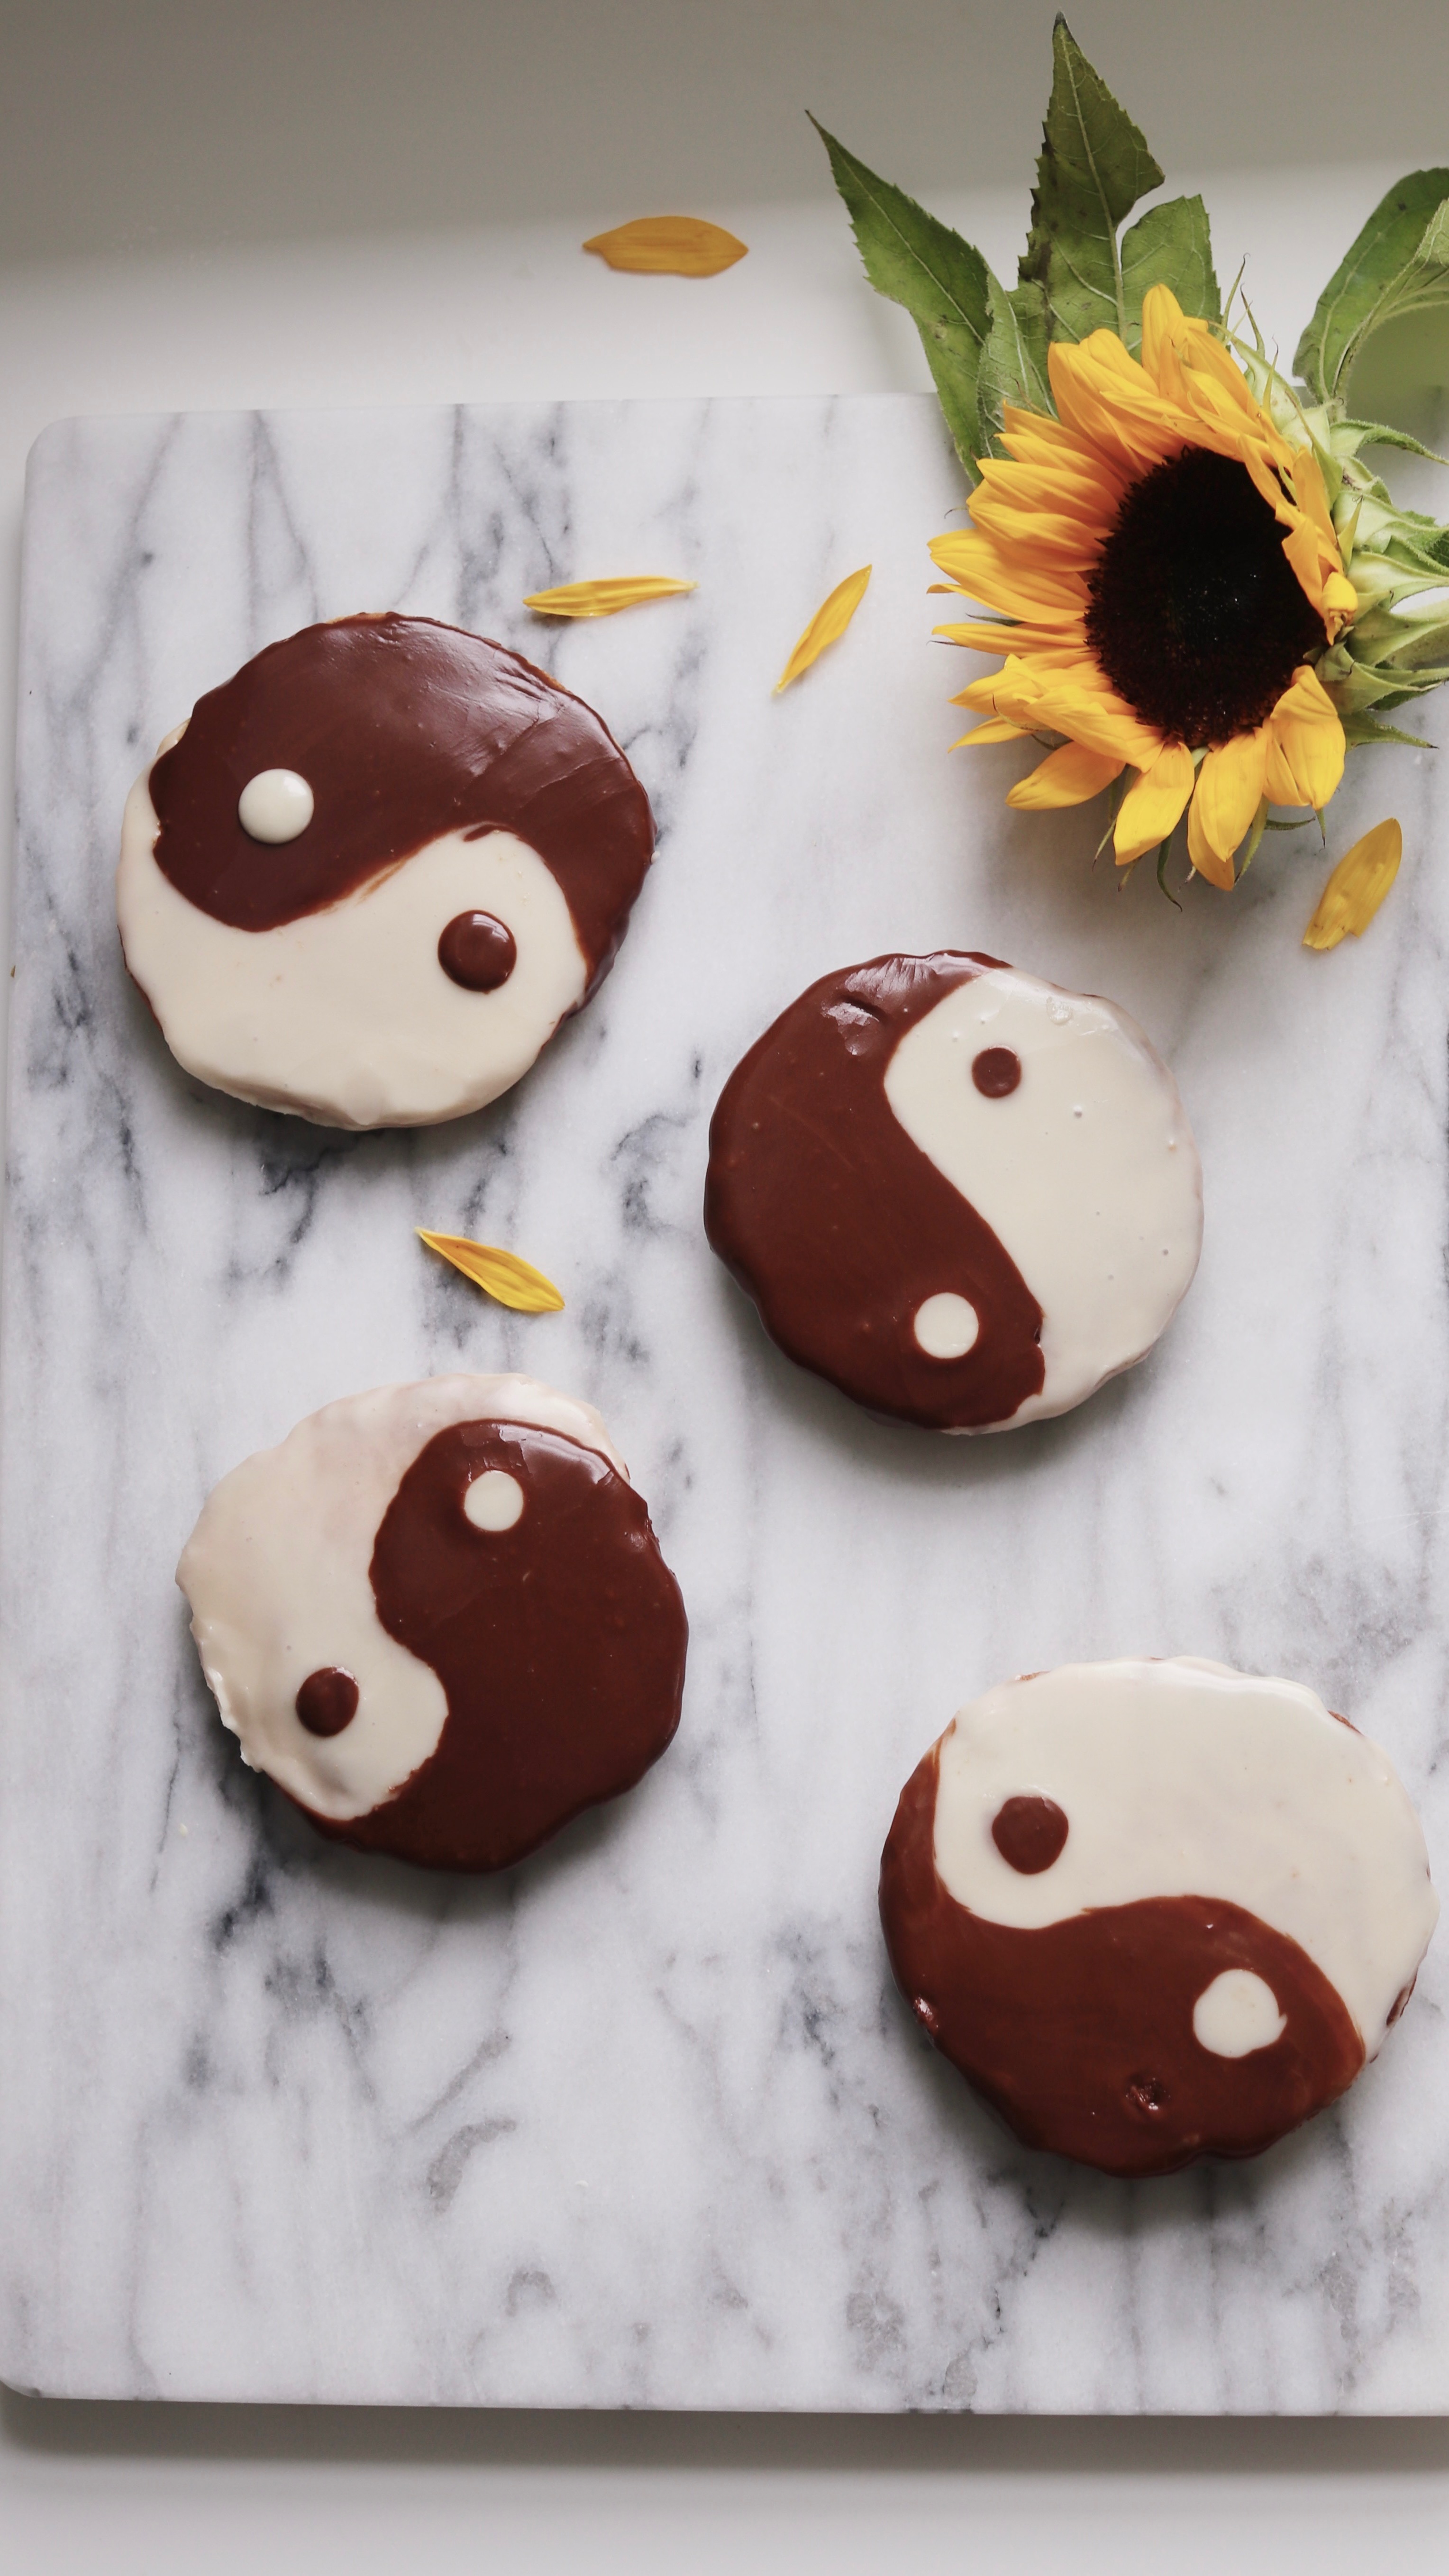 yin yang black and white cookies